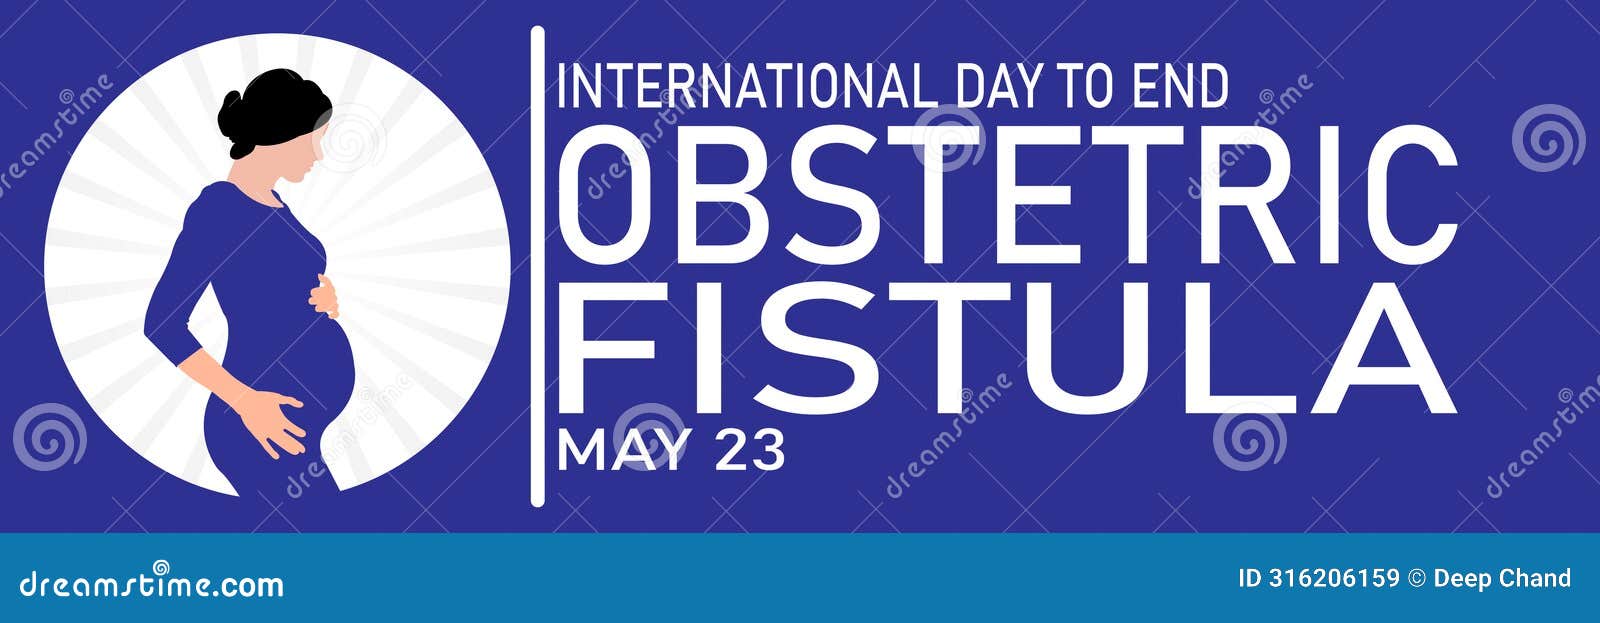 international day to end obstetric fistula